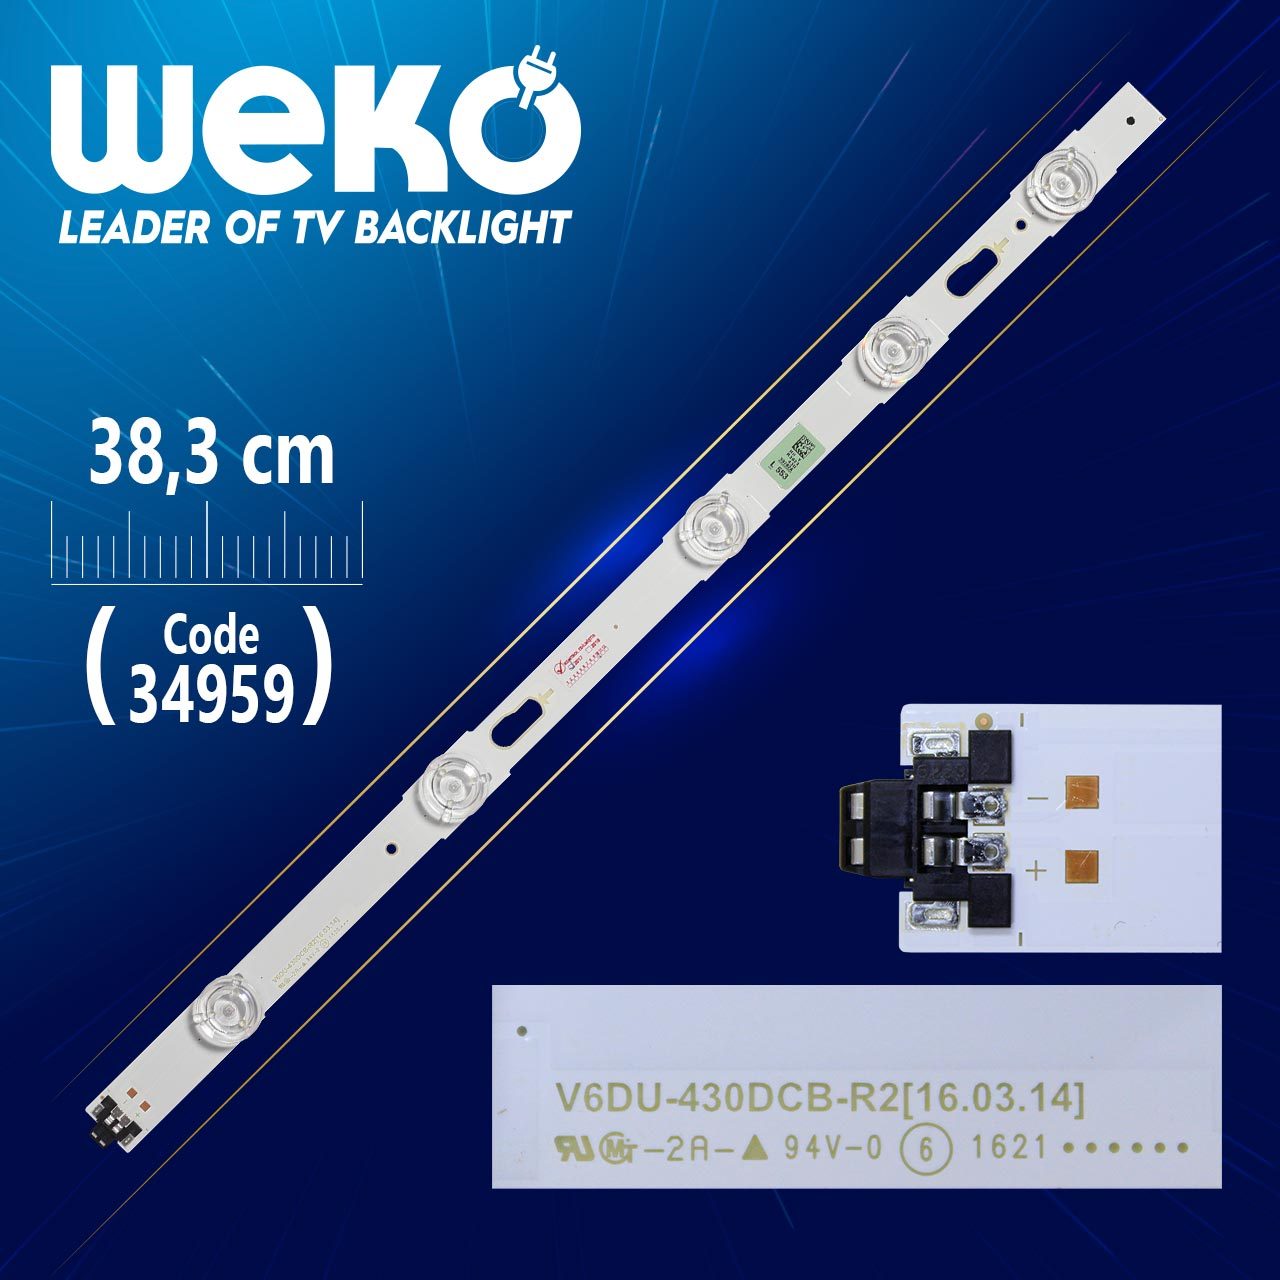 CLZ192 S_KU6K_43_FL30_R5_REV1.0 - LM41-002269A - LEFT - V6DU-430DCB-R2 - 38.3 CM 5 LEDLİ (WK-779) (4172)